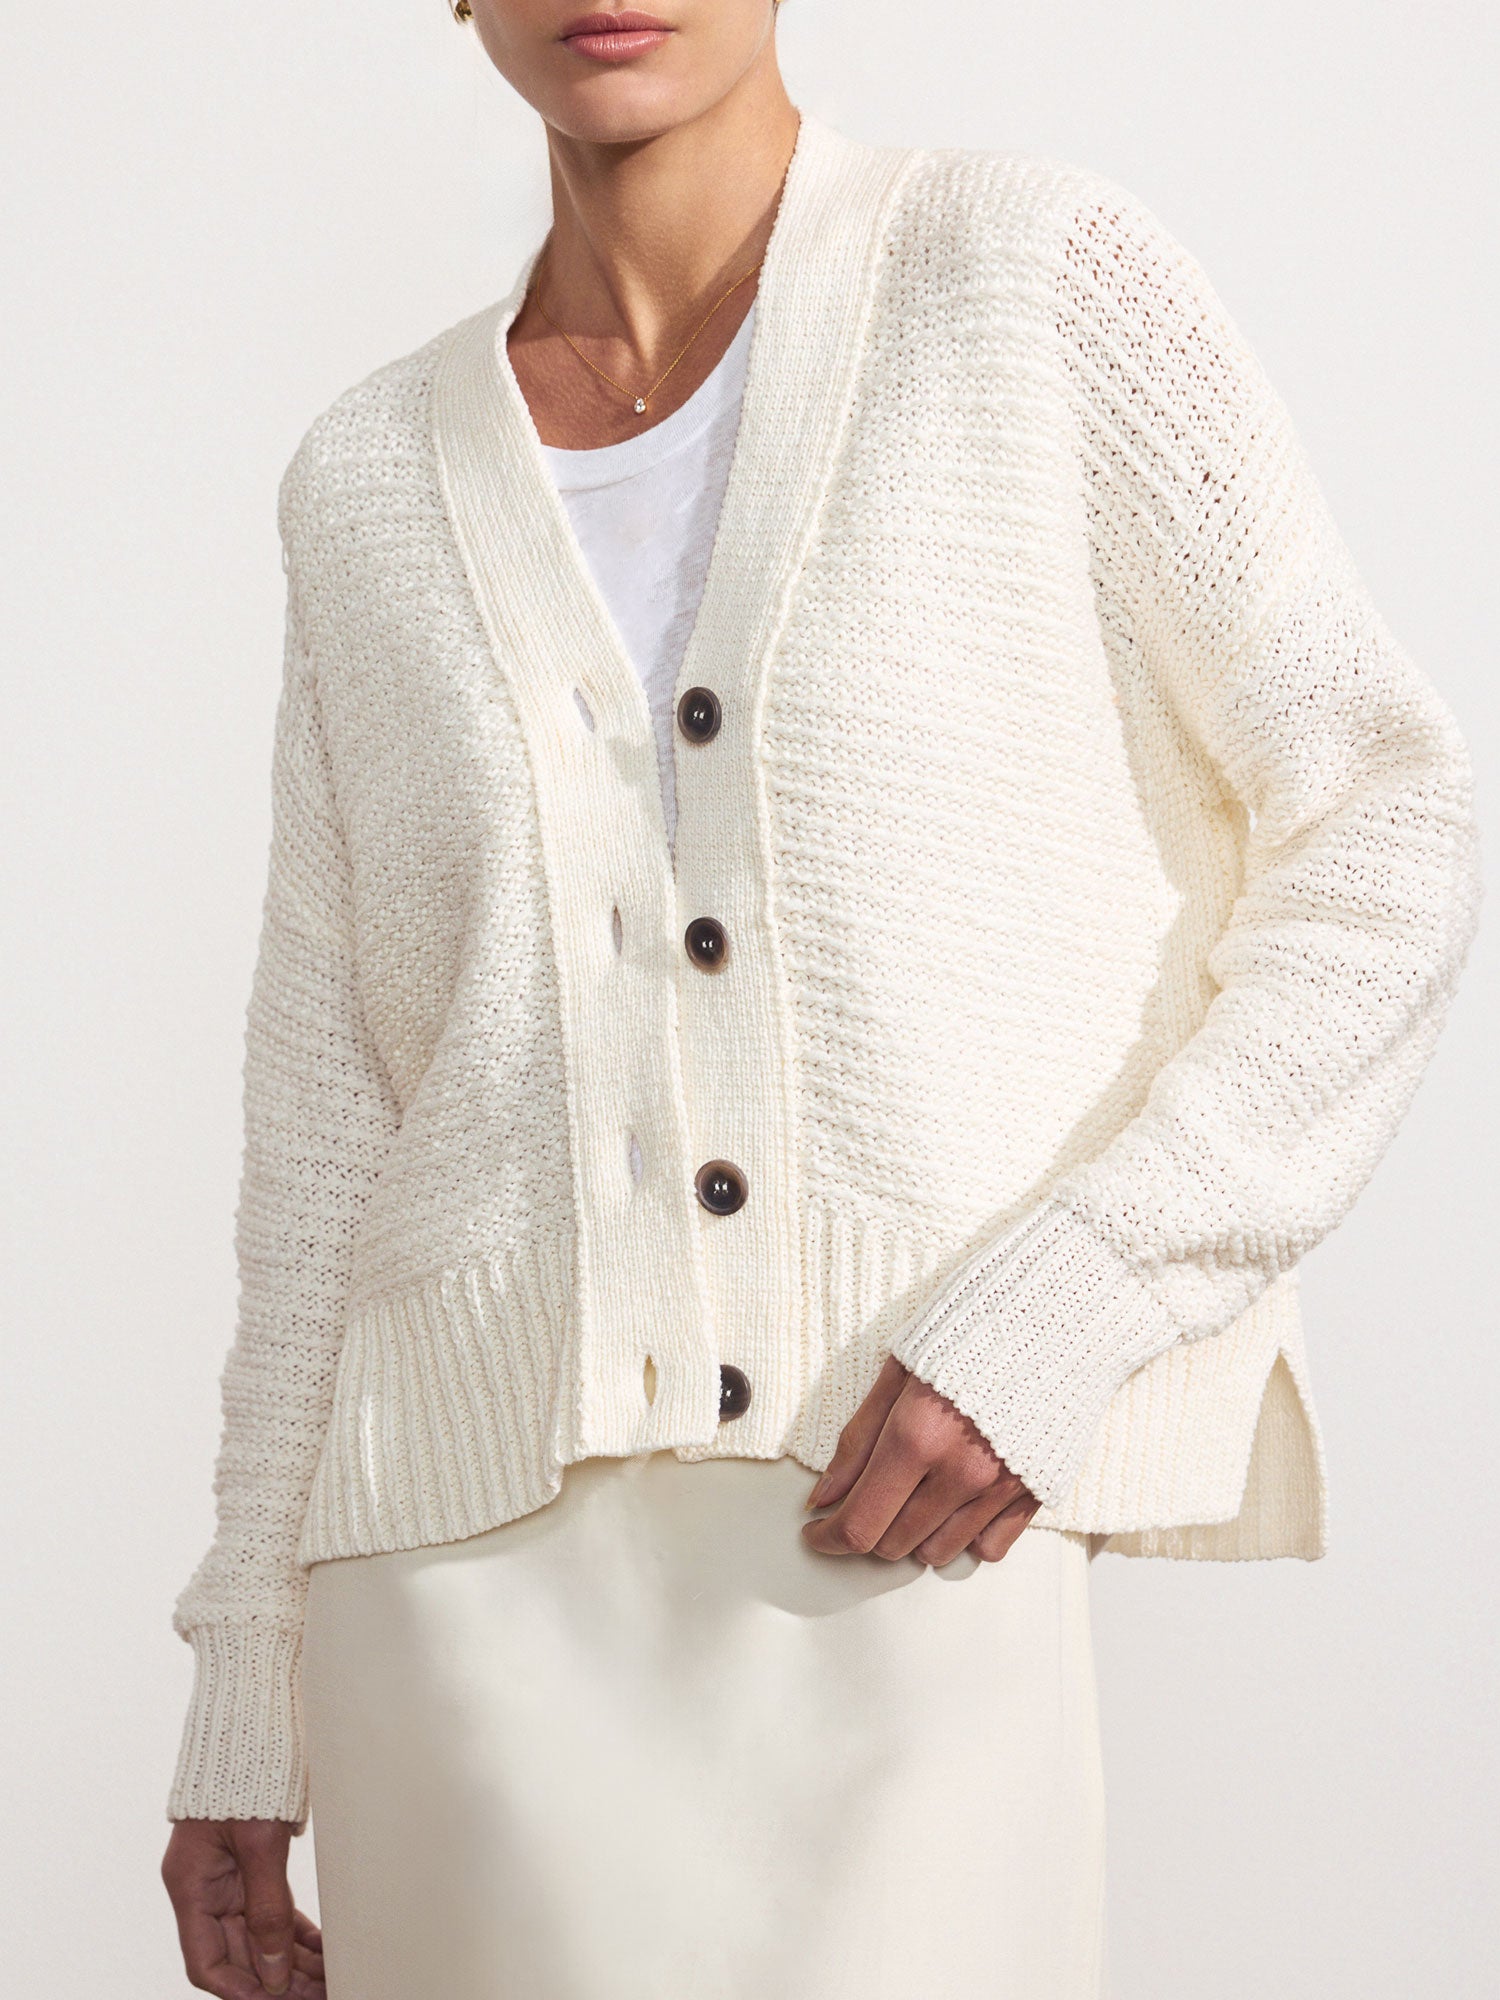 Sia cotton white cardigan sweater front view